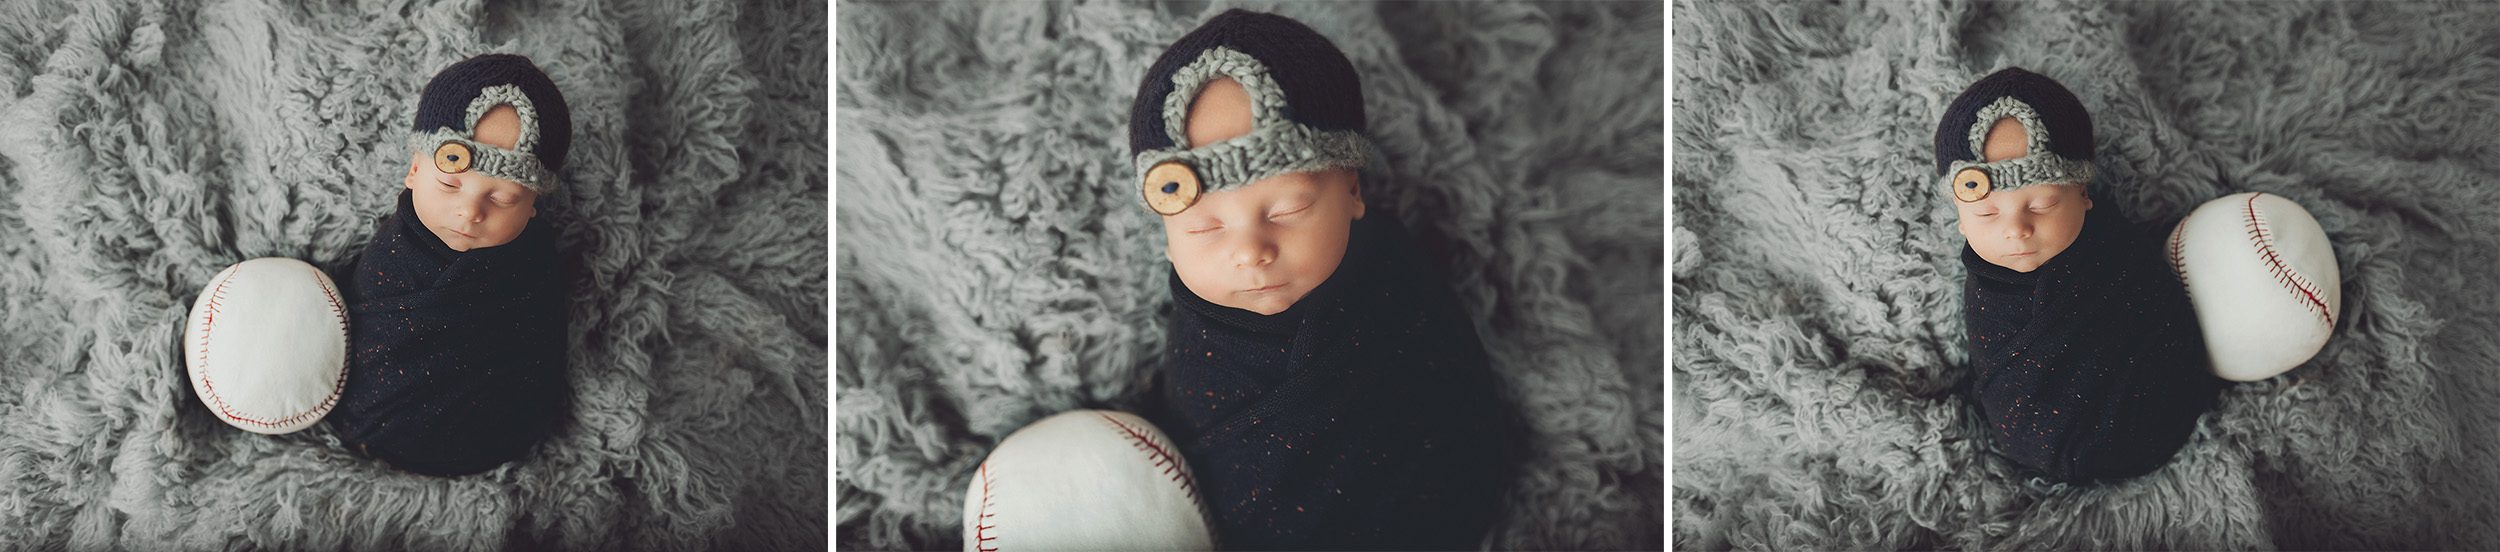 A baseball theme for his sport-loving parents